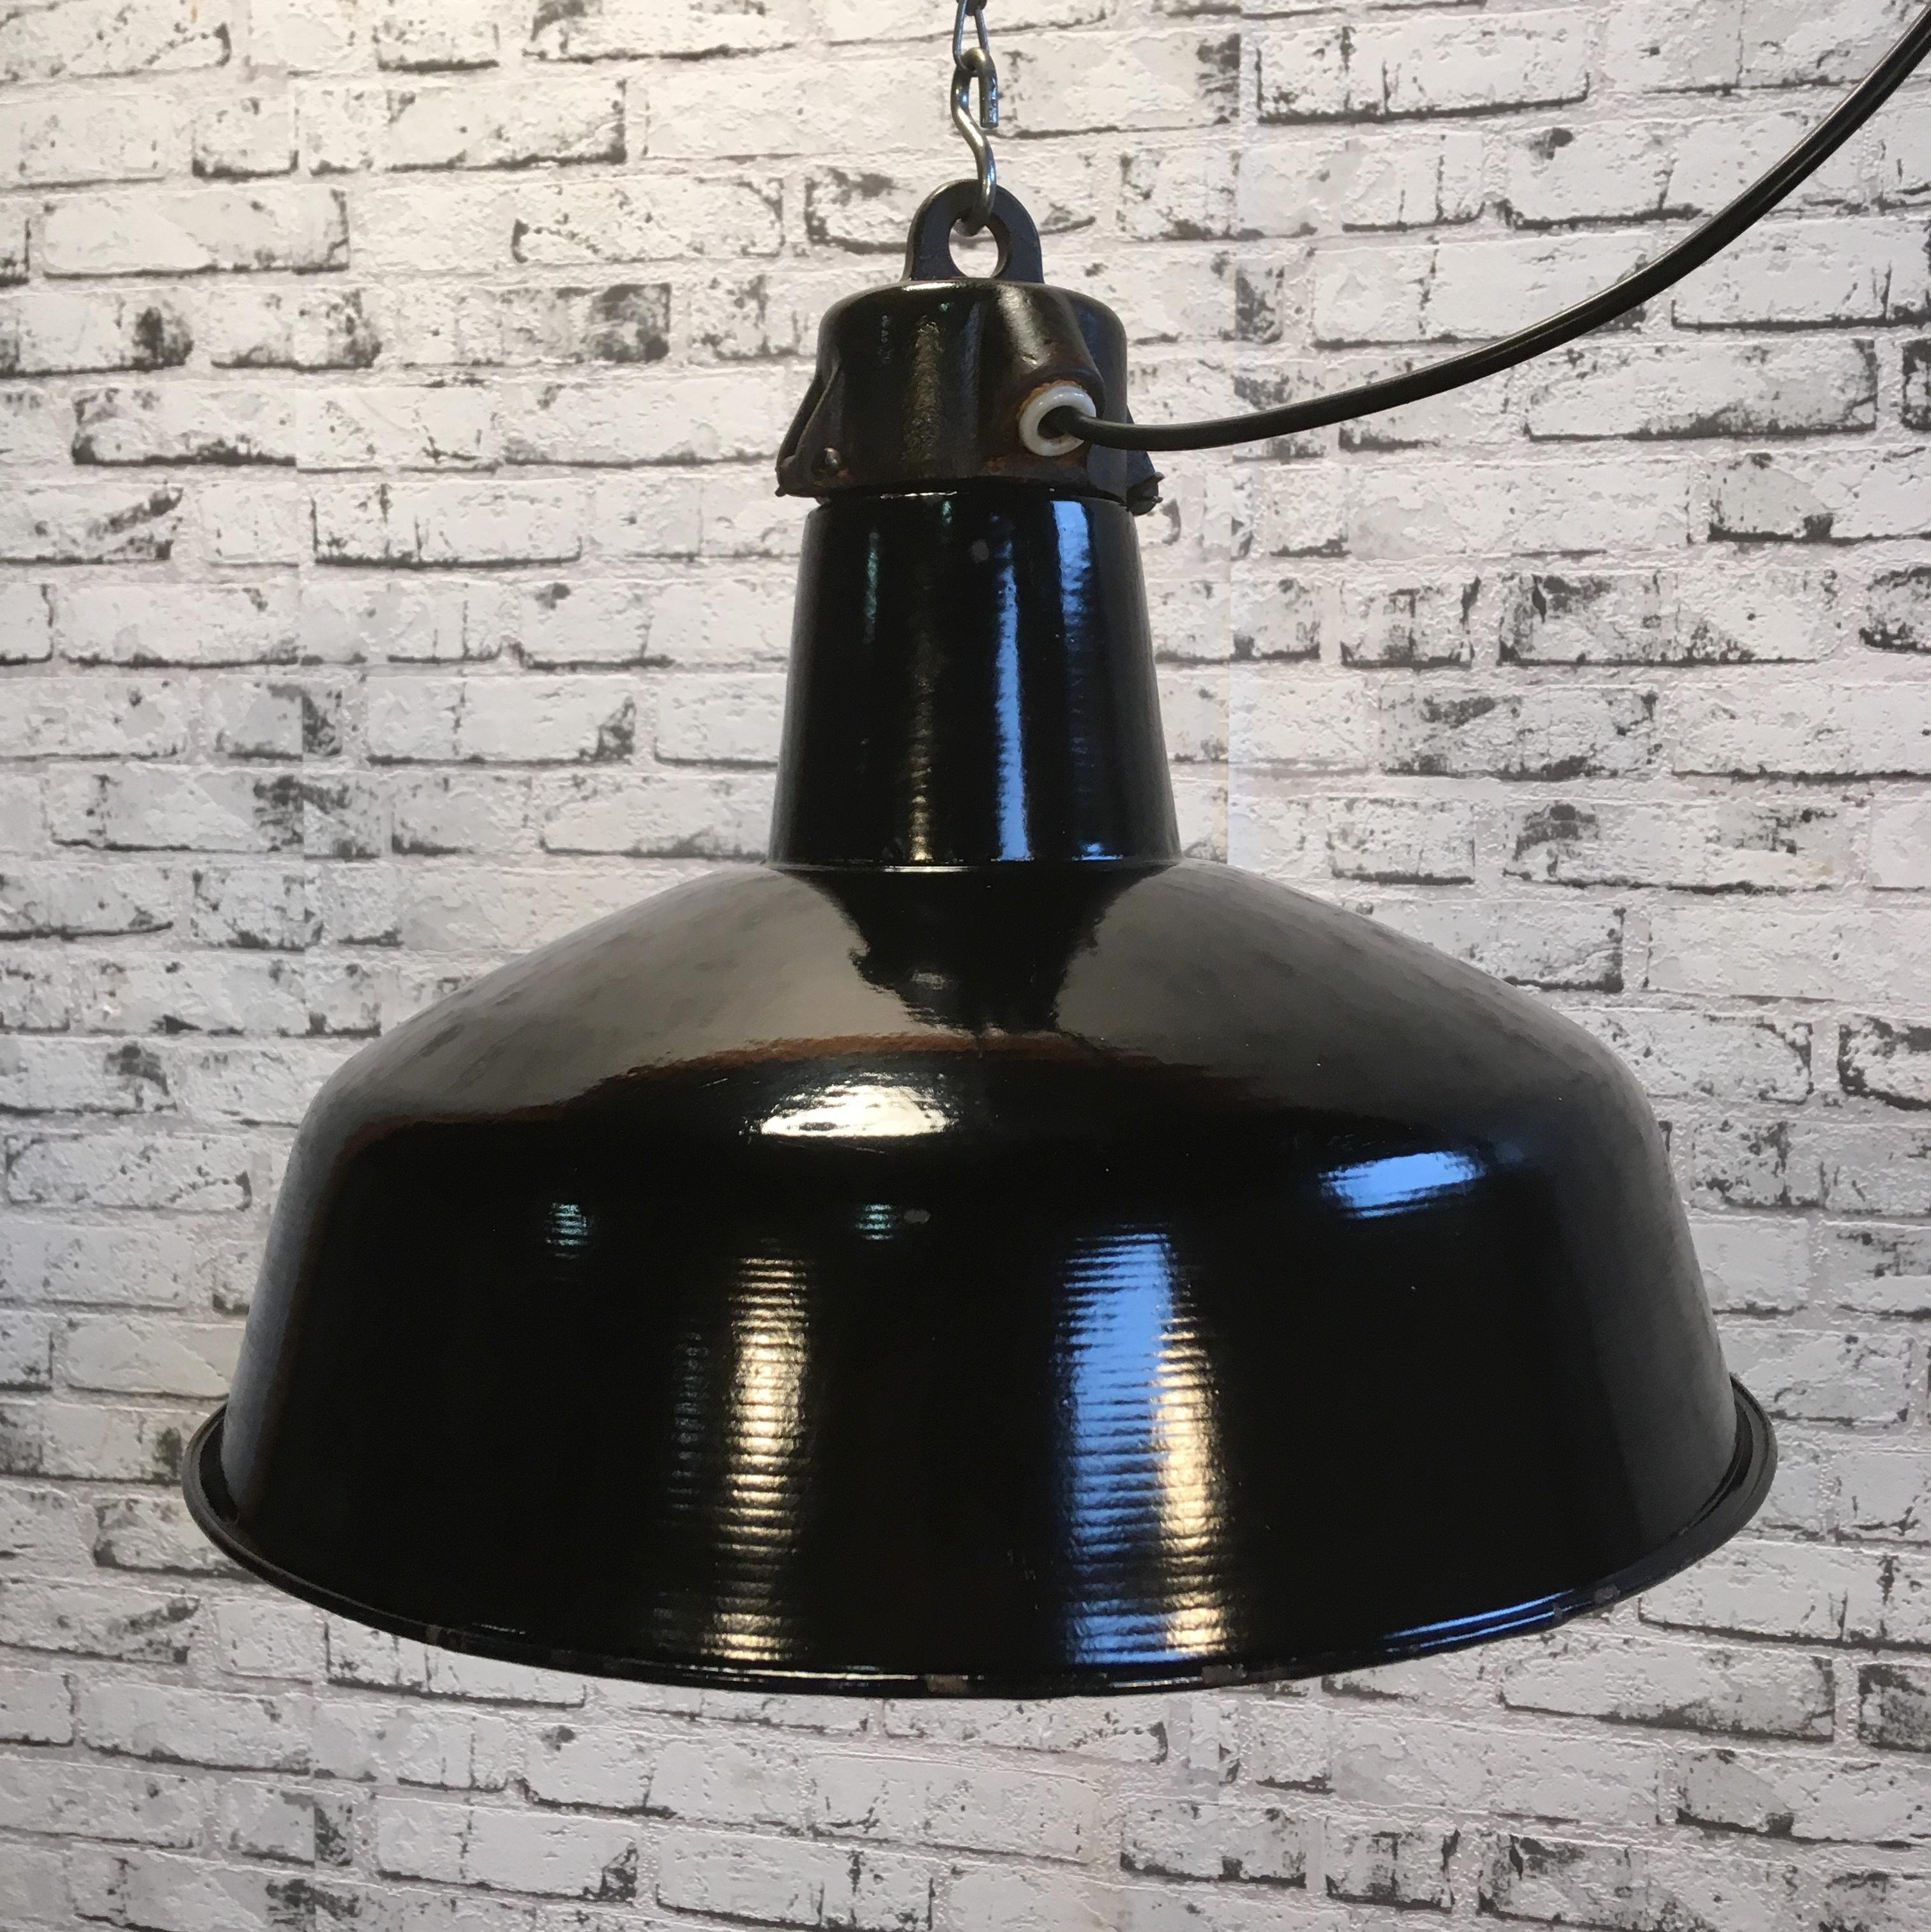 Industrial hanging lamp manufactured during the 1950s in former Czechoslovakia. Black enamel shade, white enamel interior. Cast iron top.
New porcelain socket for E 27 lightbulbs and wire. Very good vintage condition. Fully functional.